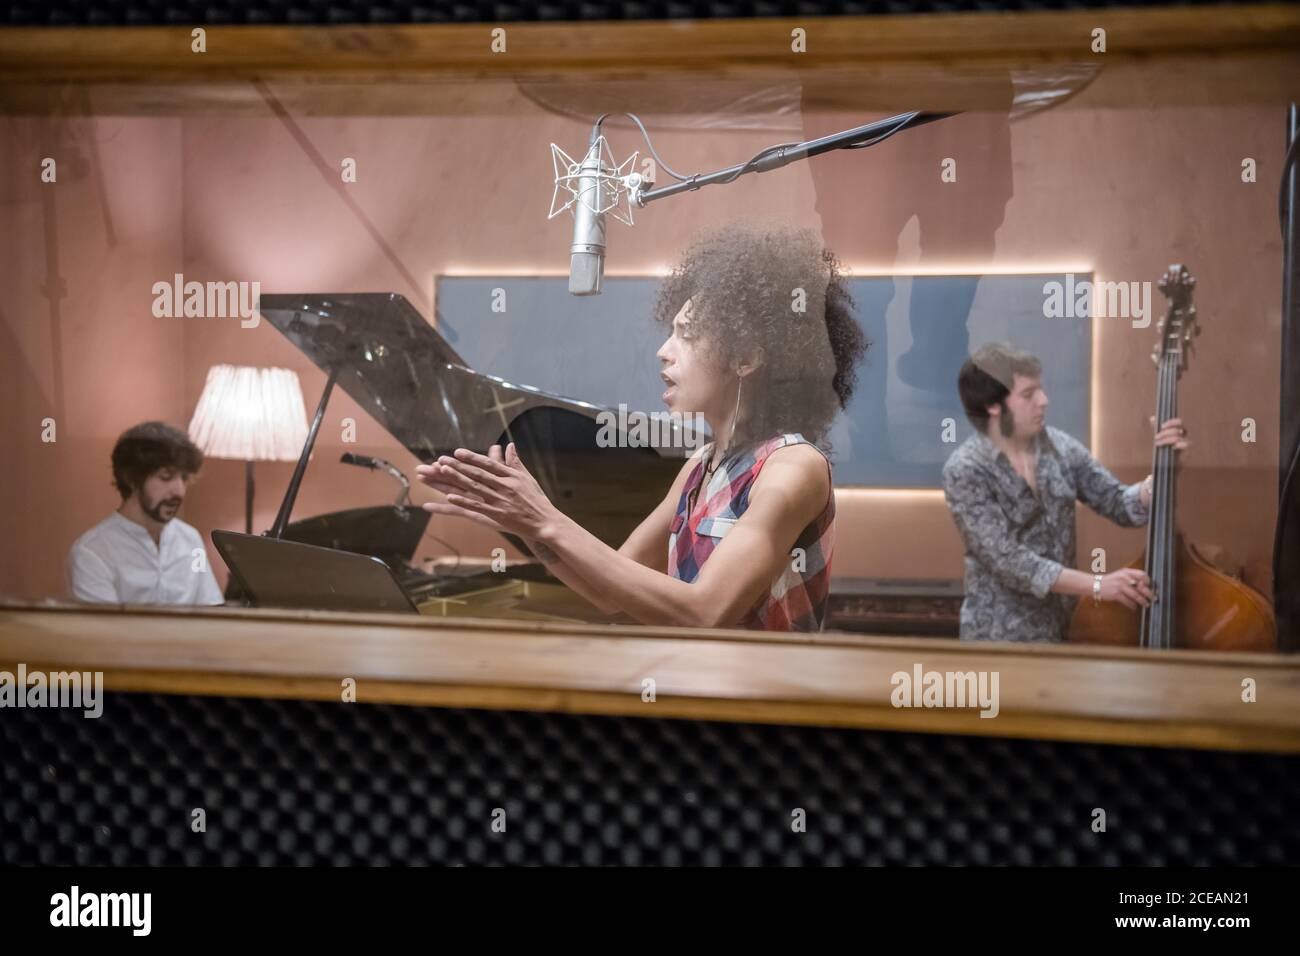 Attractive Woman singing song and clapping hands while rehearsing with band in recording studio. Stock Photo